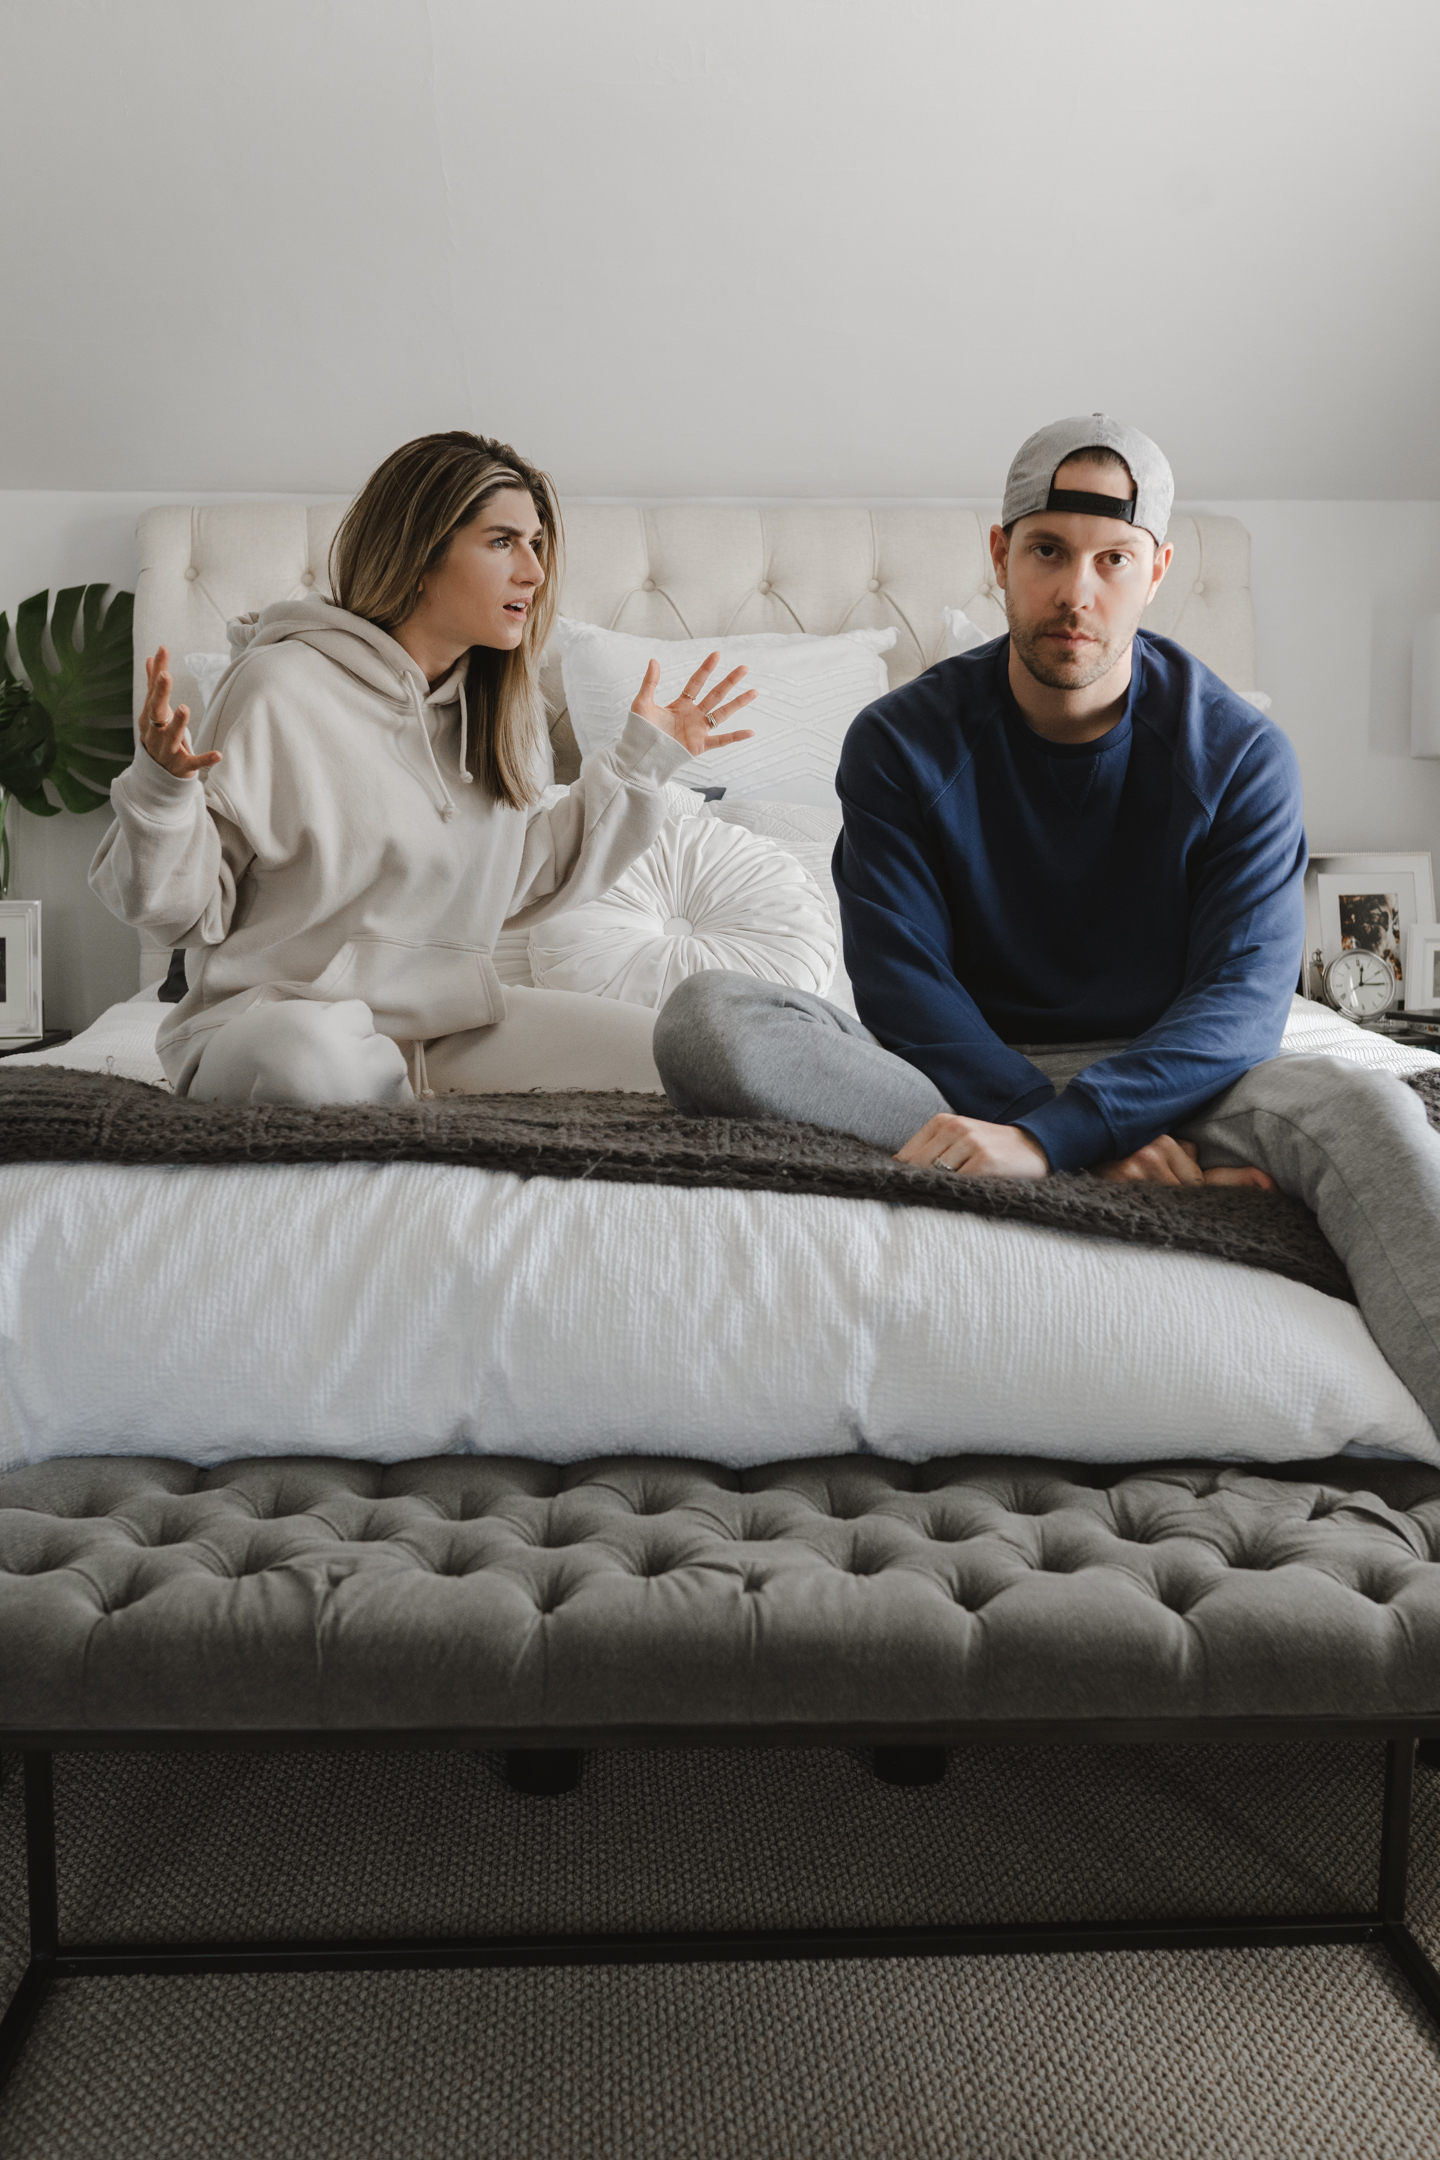 The Grey Edit - Seattle Lifestyle Blogger - How to Make It Through Quarantine with Your Significant Other - Relationship Tips - Husband and Wife 